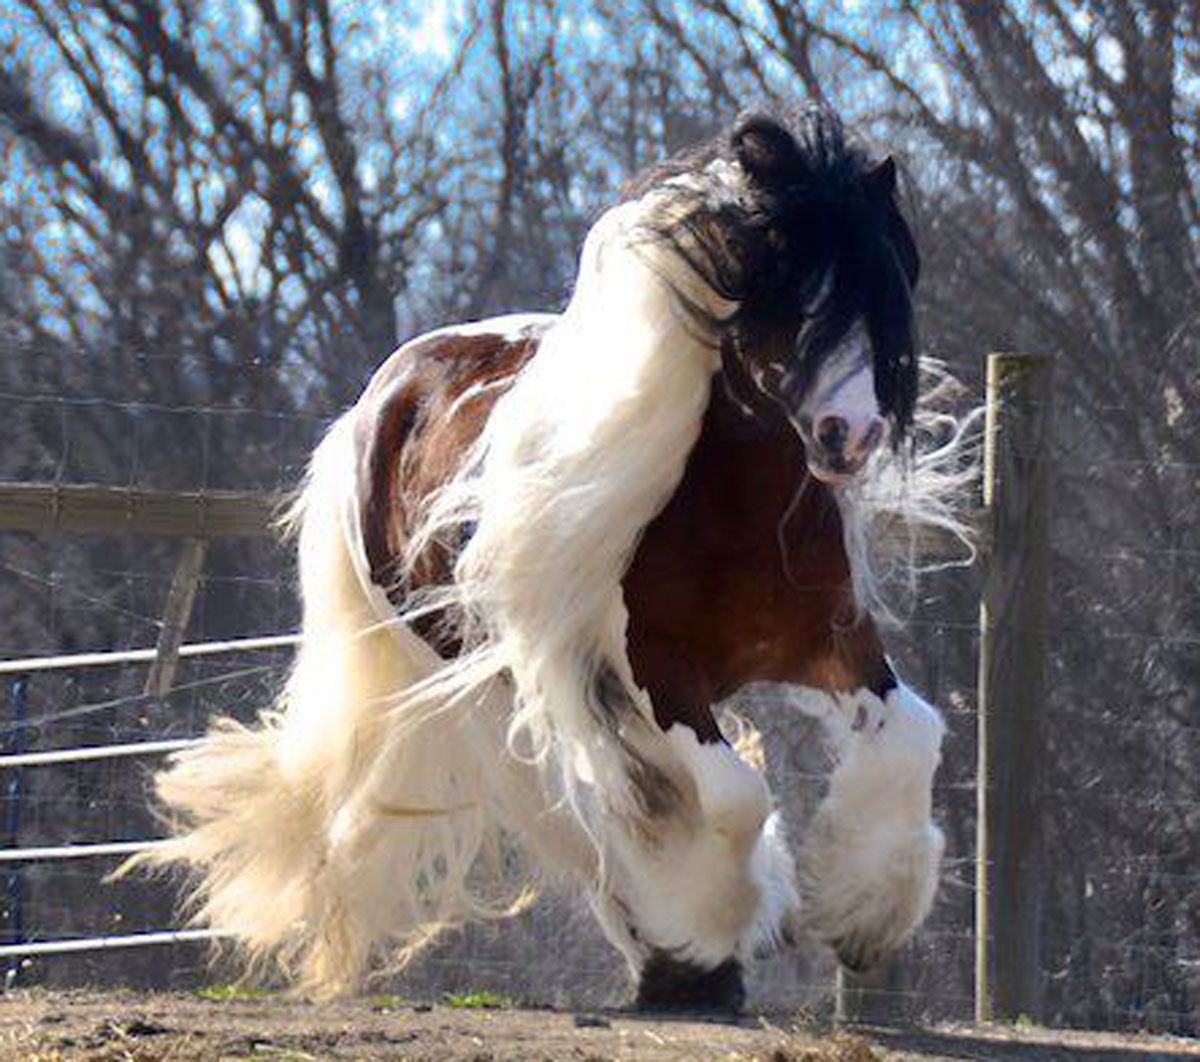 Horses With Great Hair